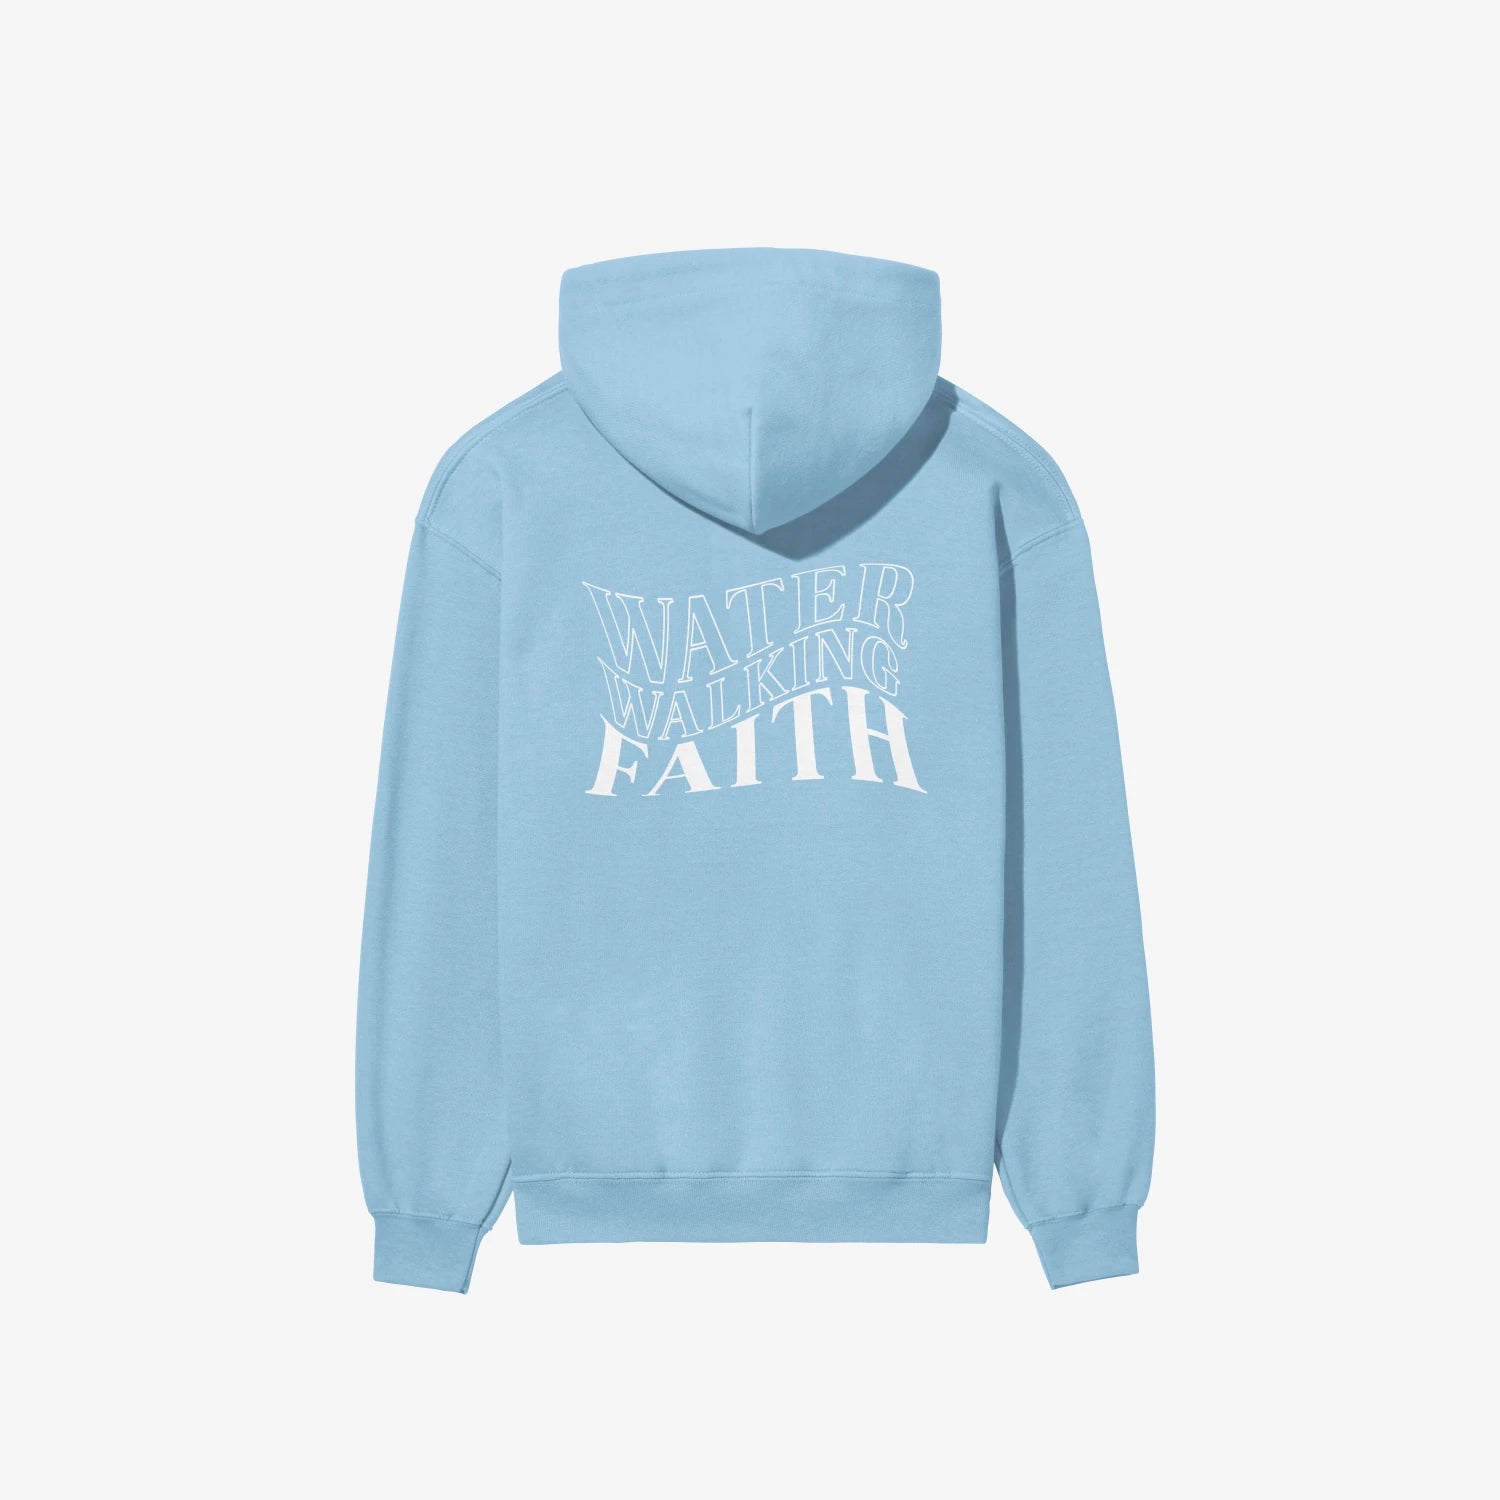 A blue Water Walking Faith Hoodie with white text featuring the words "Water Walking Faith"
from the brand Be Still and Know.